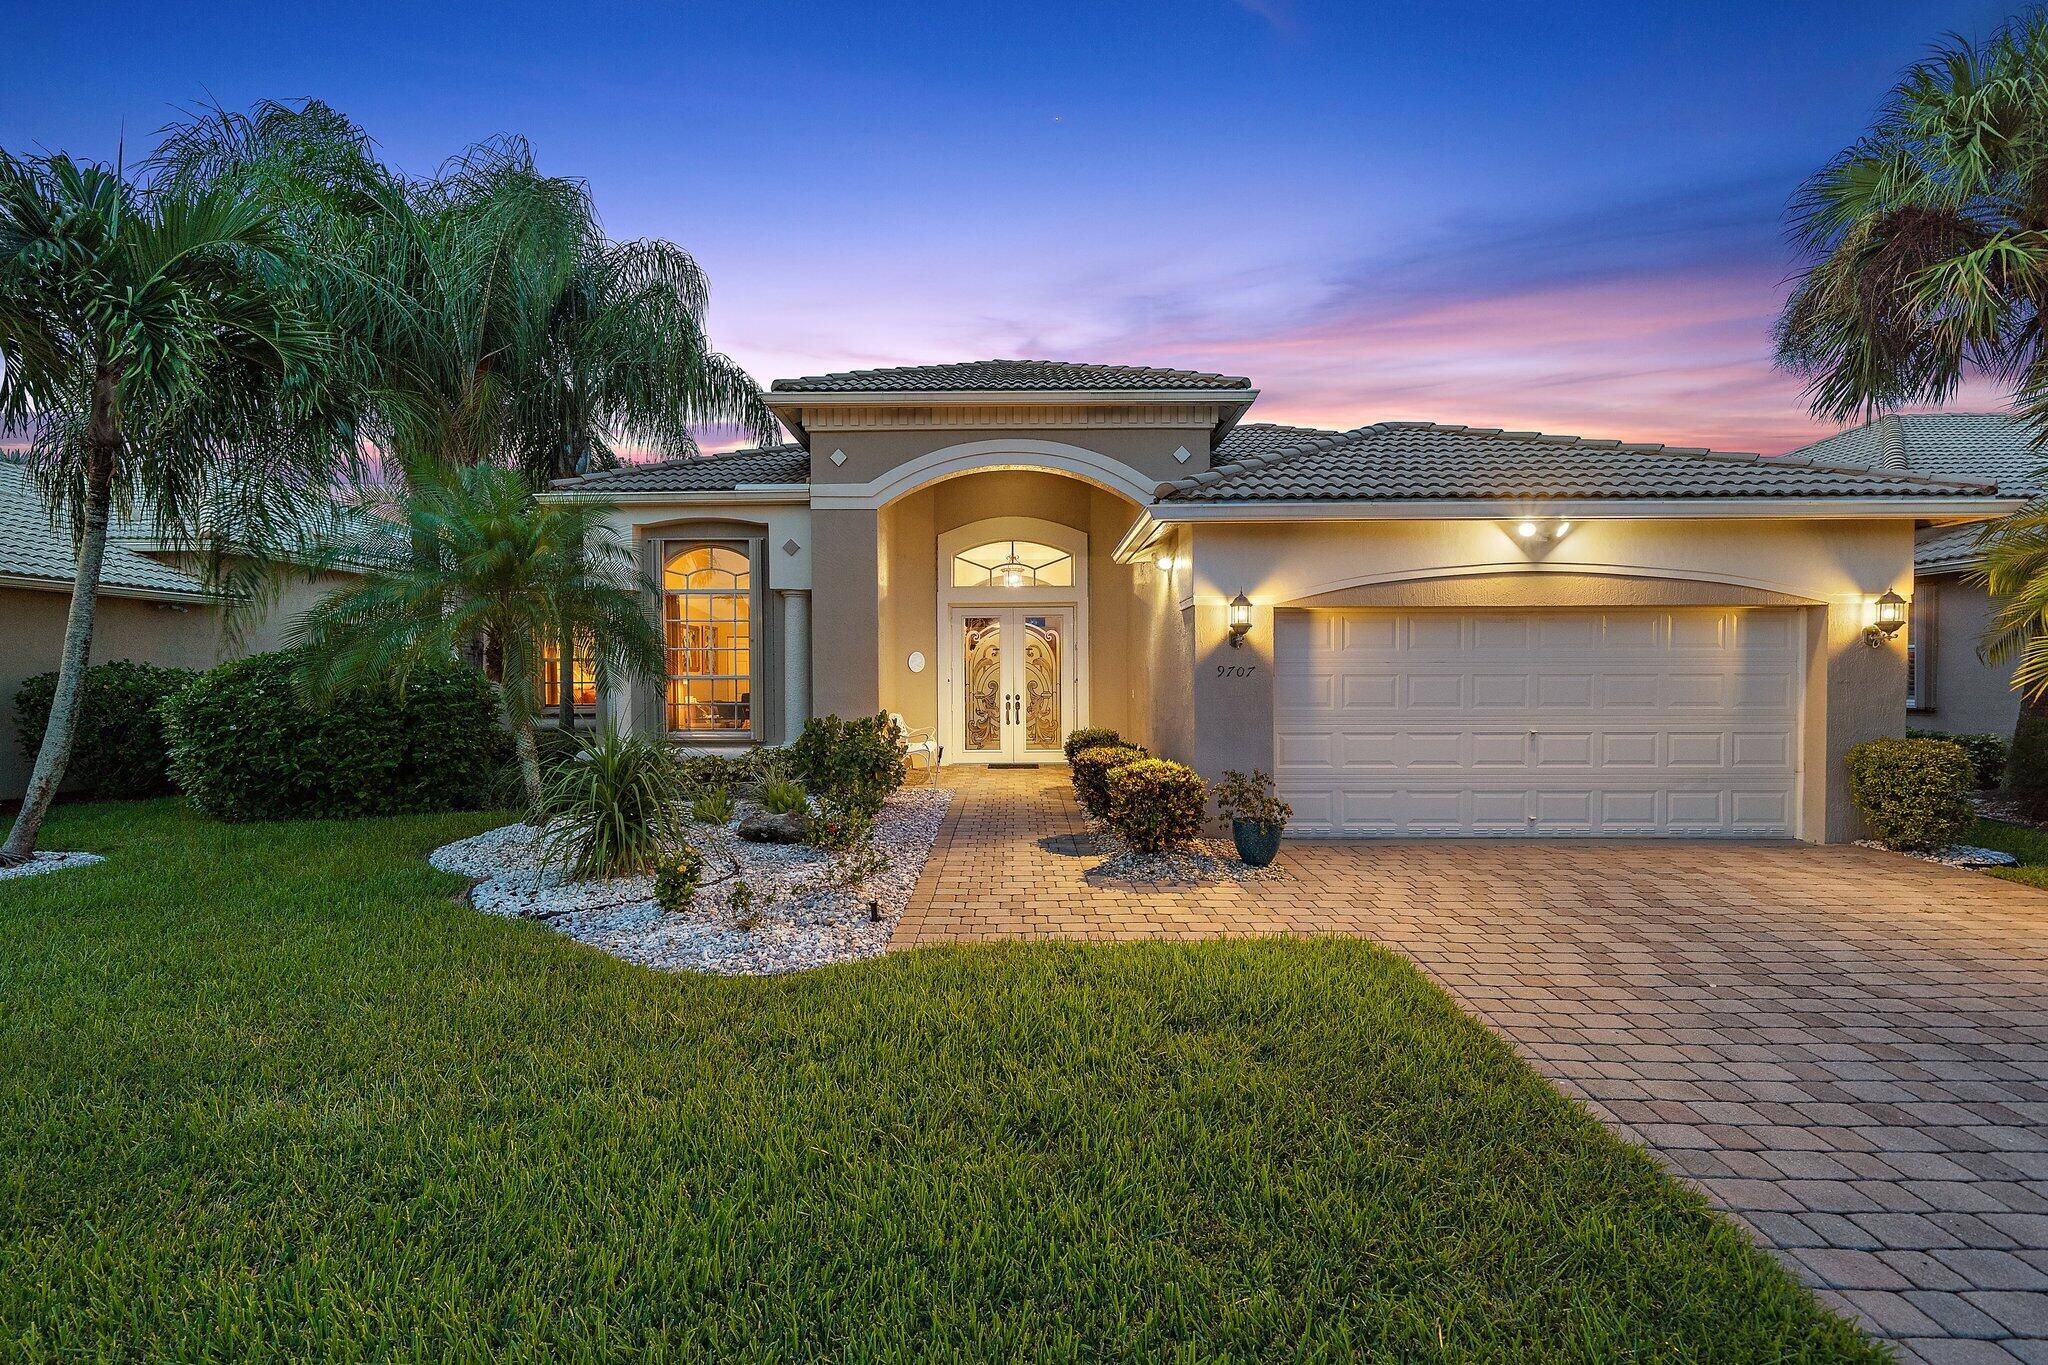 Priced to Sell ! Rarely available in Beautiful Bellagio, this stunning CBS custom estate home offers one level living, open fllor plan, vaulted ceilings, huge windows, custom cabinets, granite counters, ...